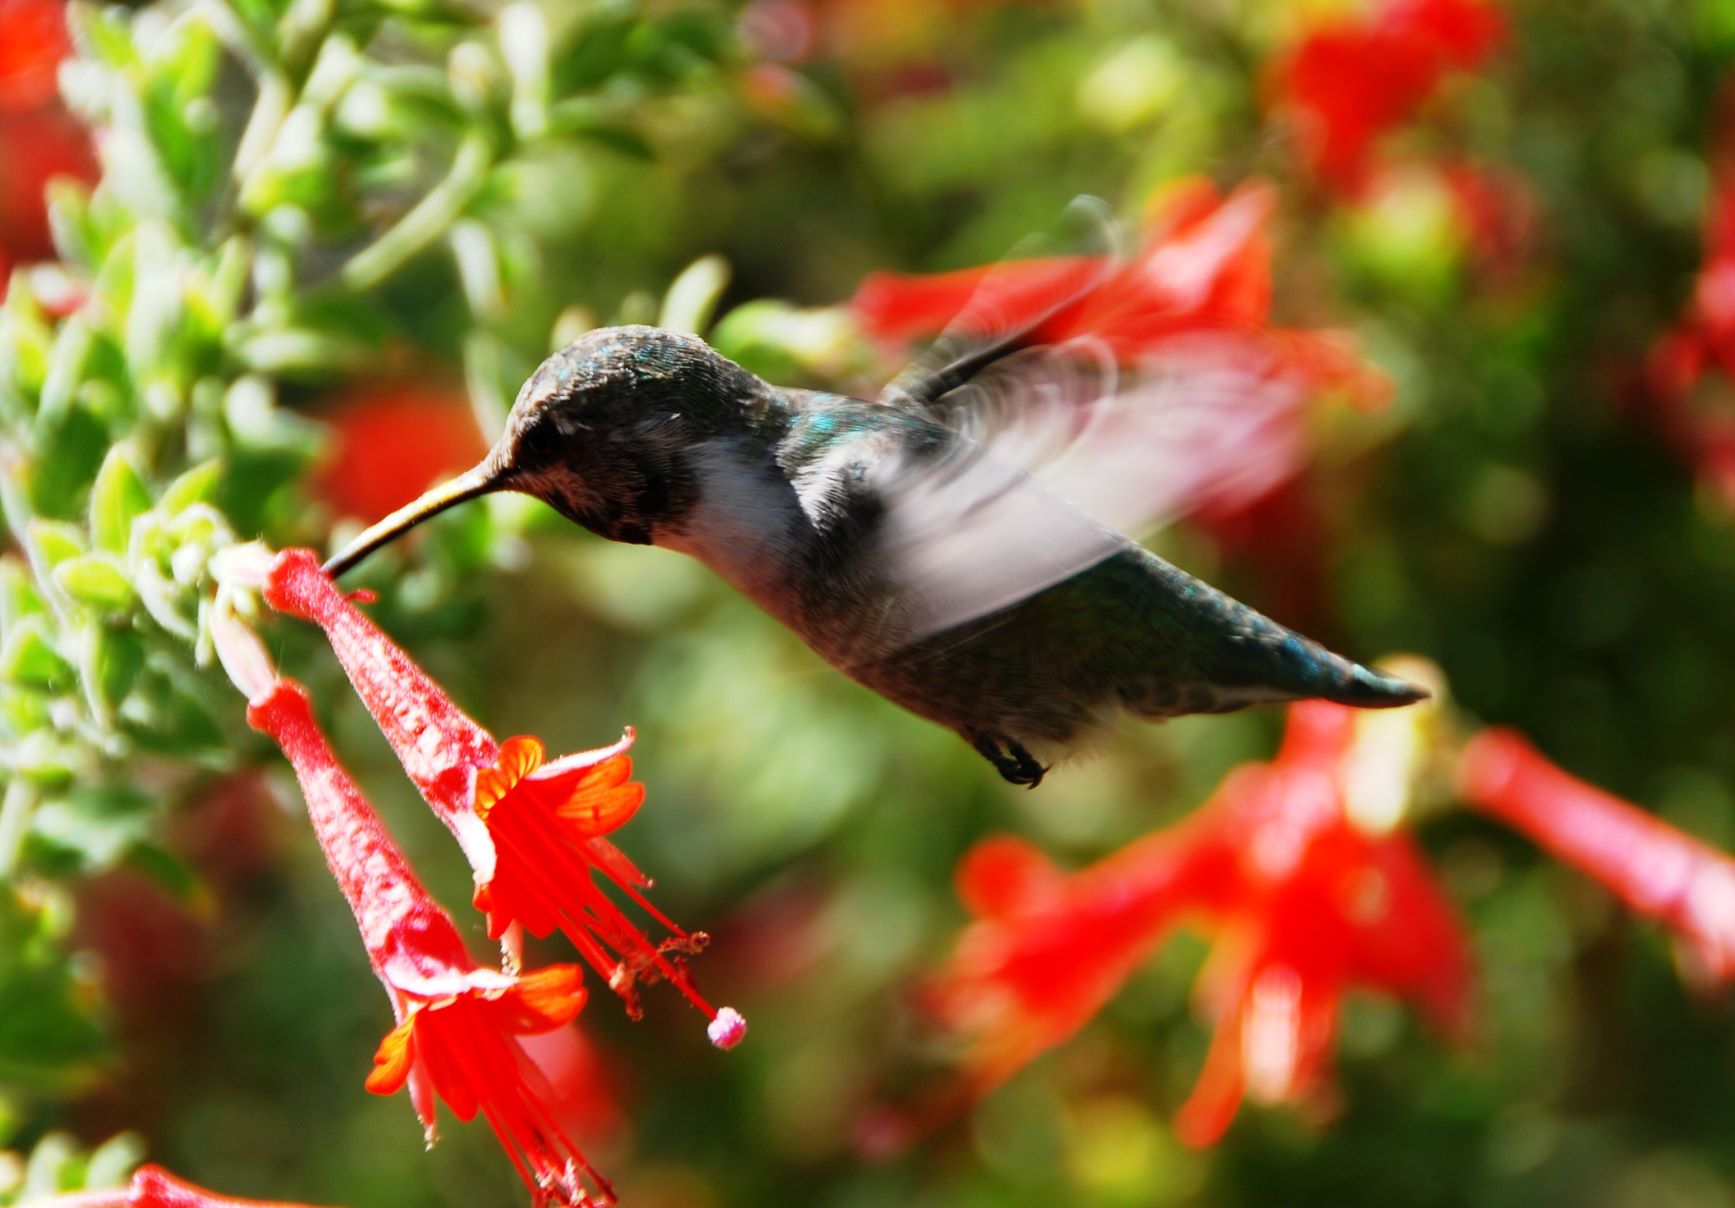 A Black-chinned Hummingbird stops to feed on a red flower.